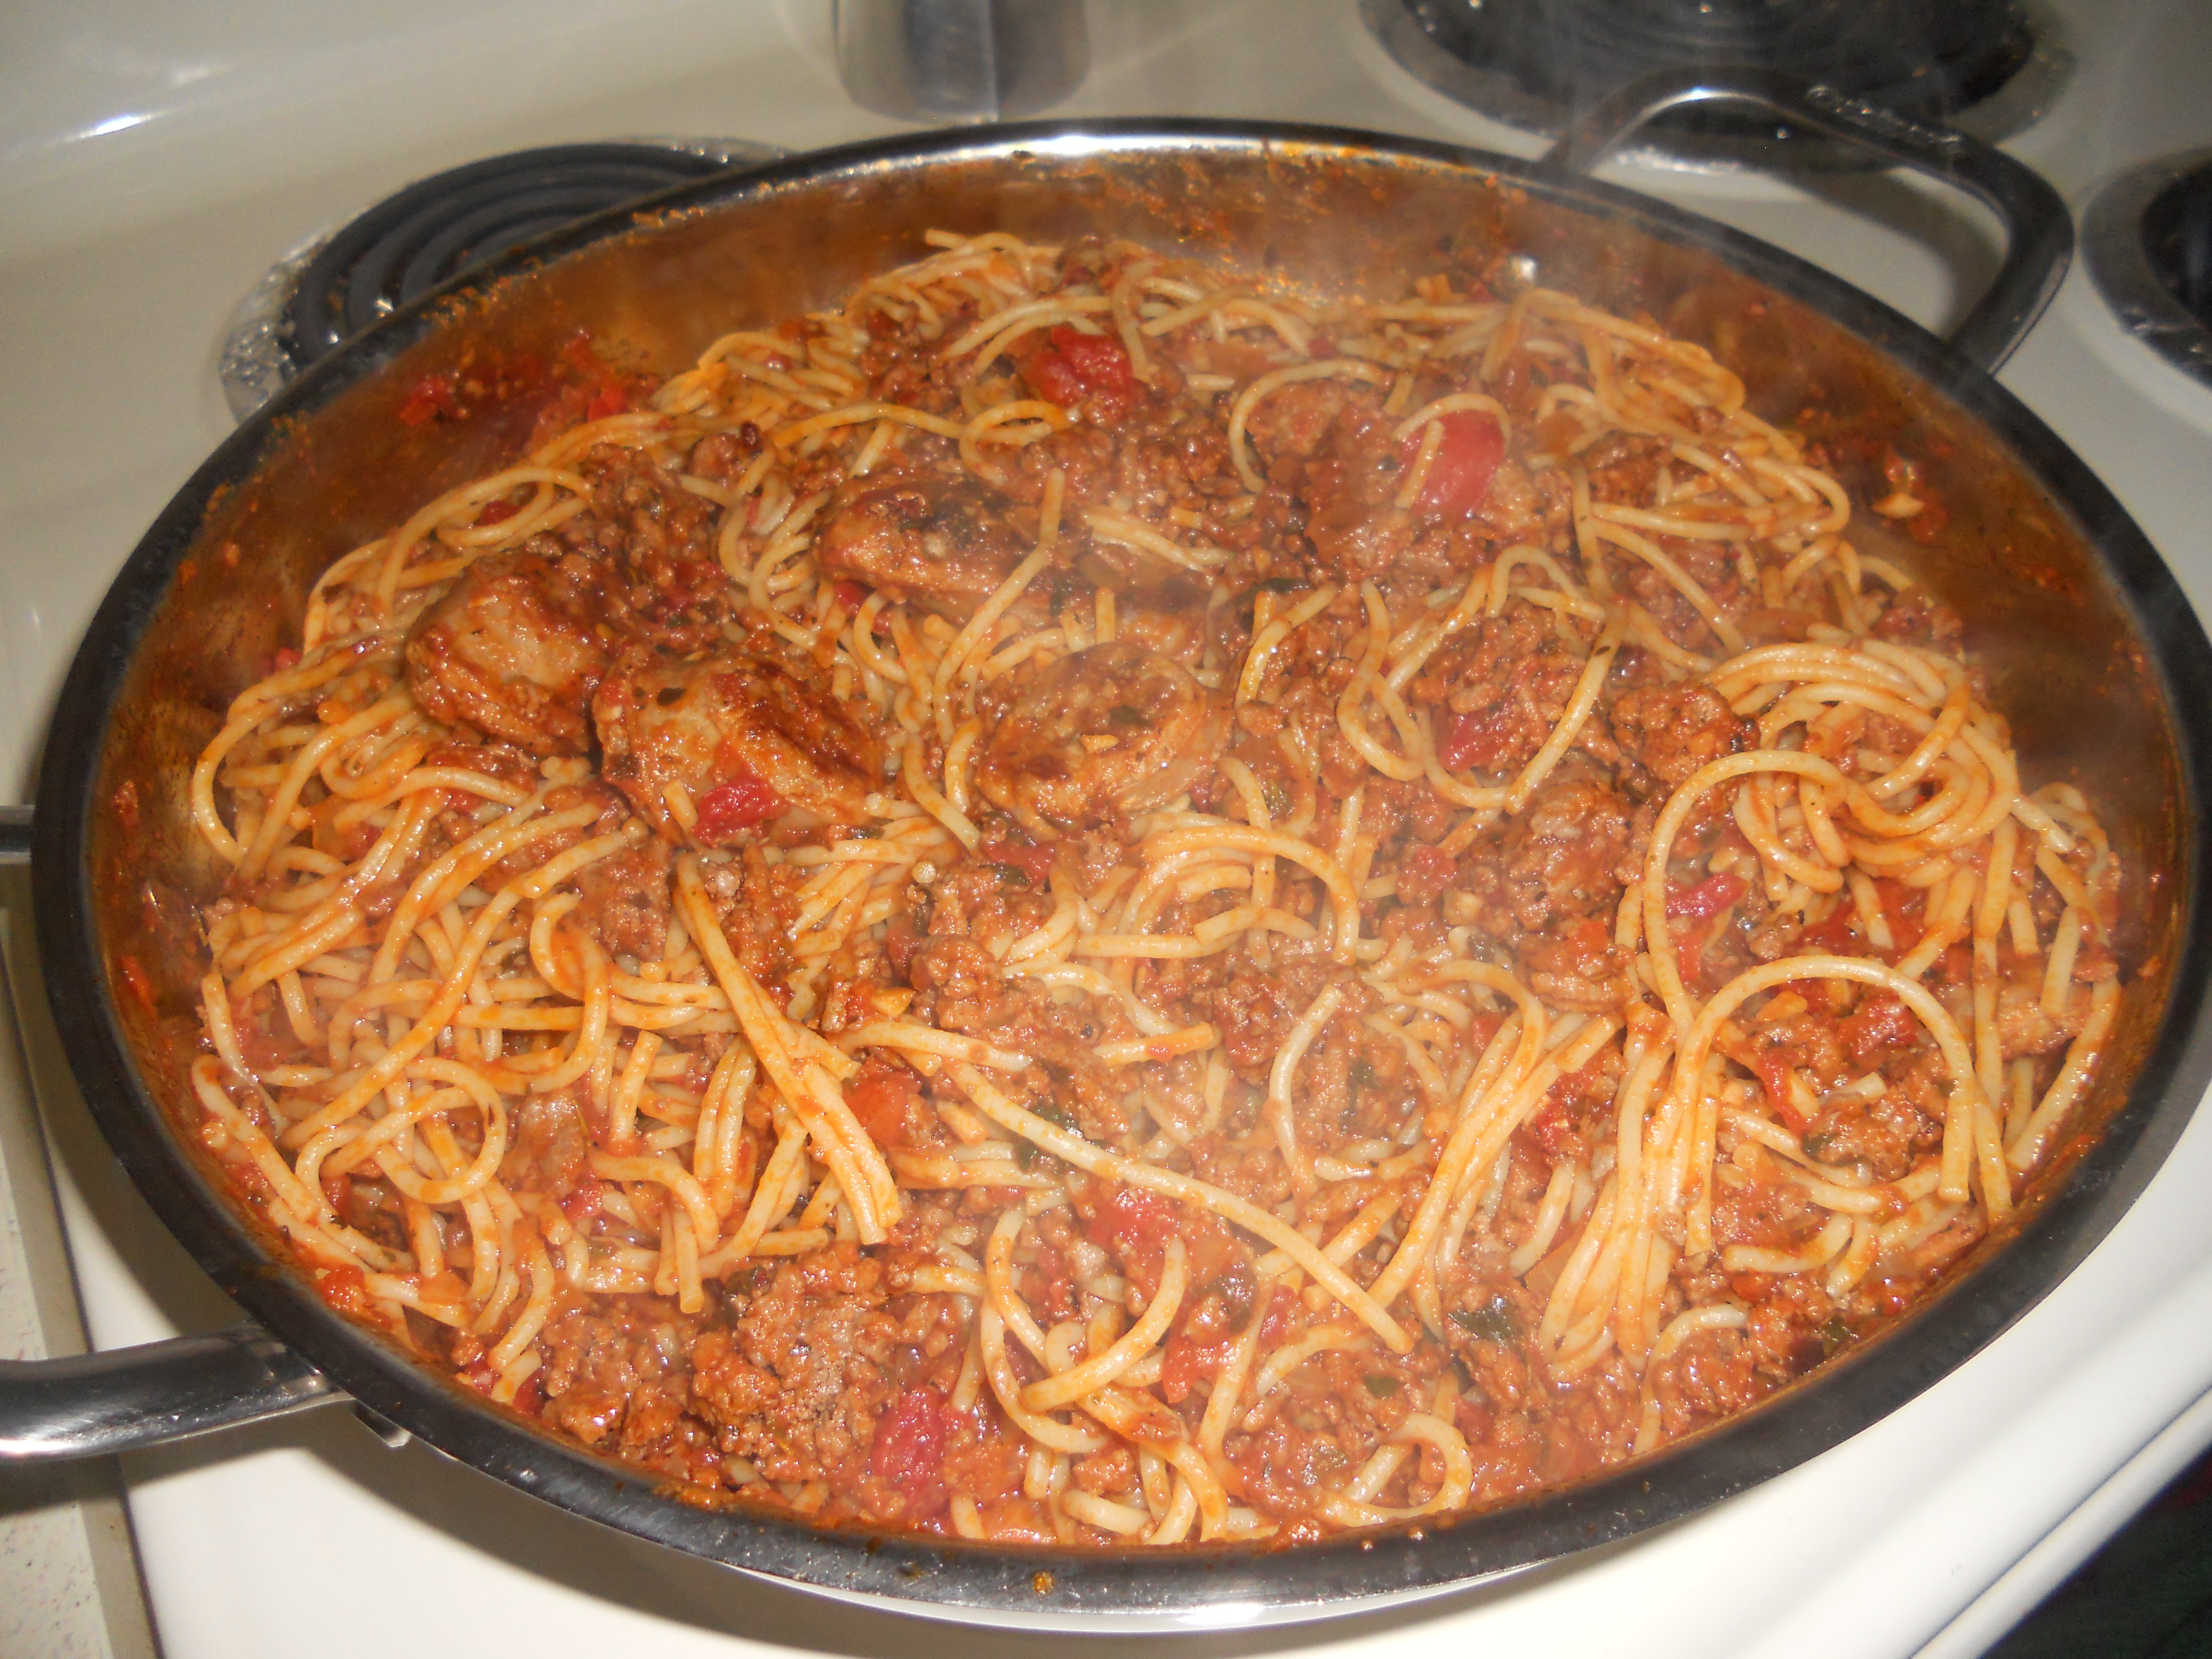 How To Make Spaghetti With Ground Beef
 spaghetti recipe with ground beef